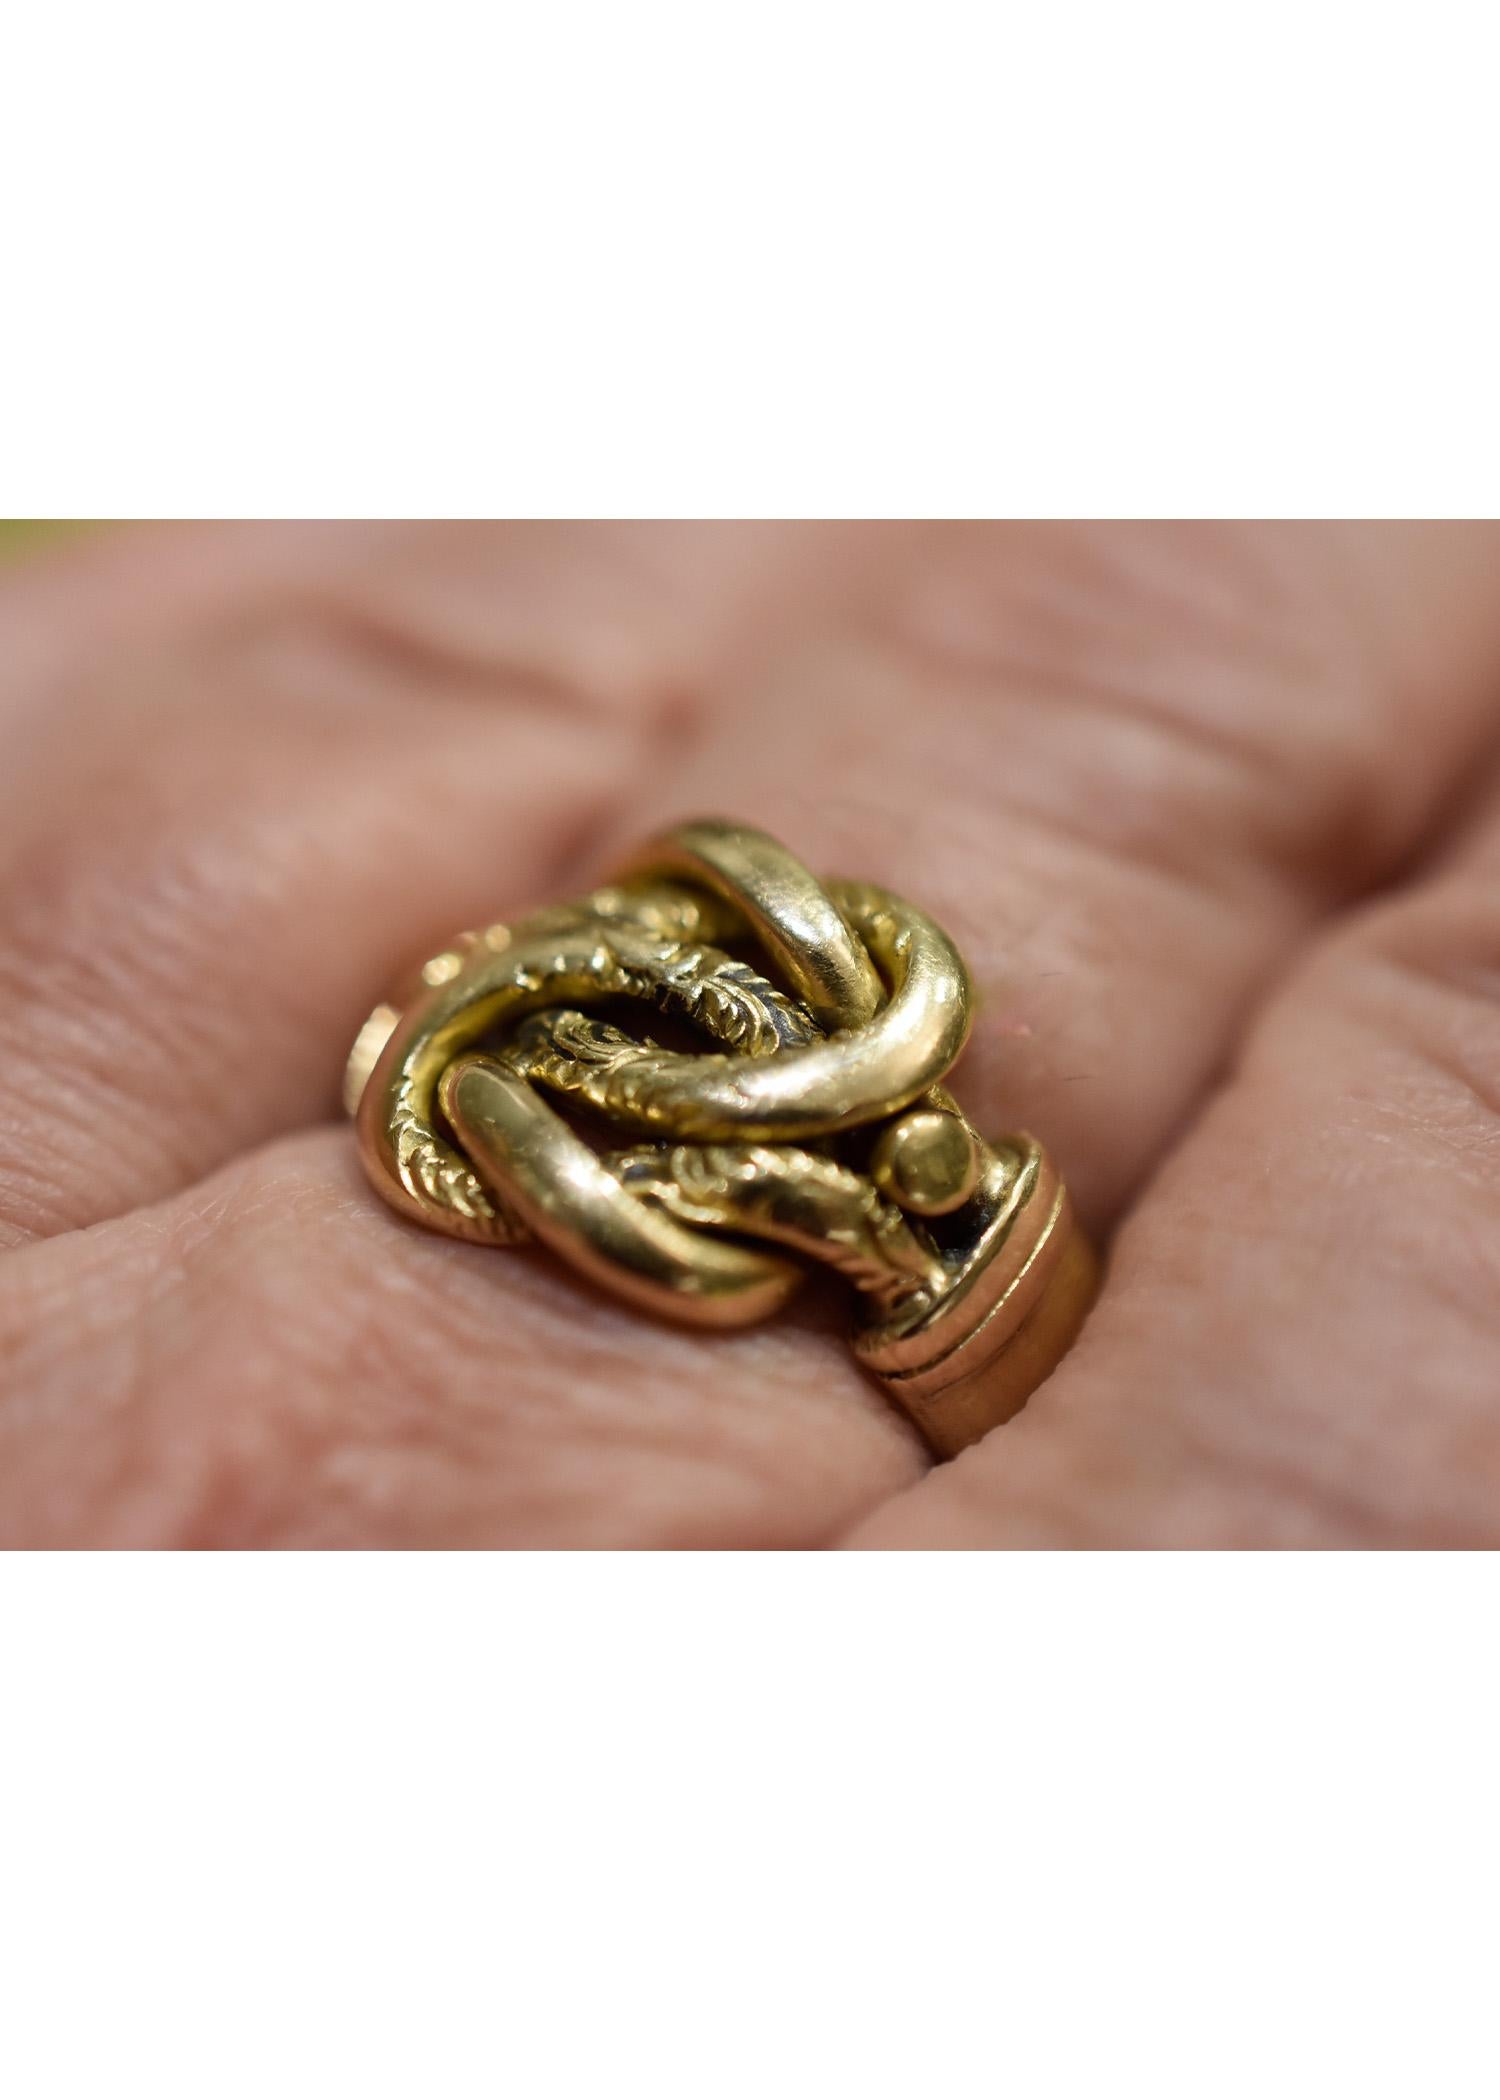 18k Chunky Victorian Lover's Knot Band Ring Hallmarked 1912 3